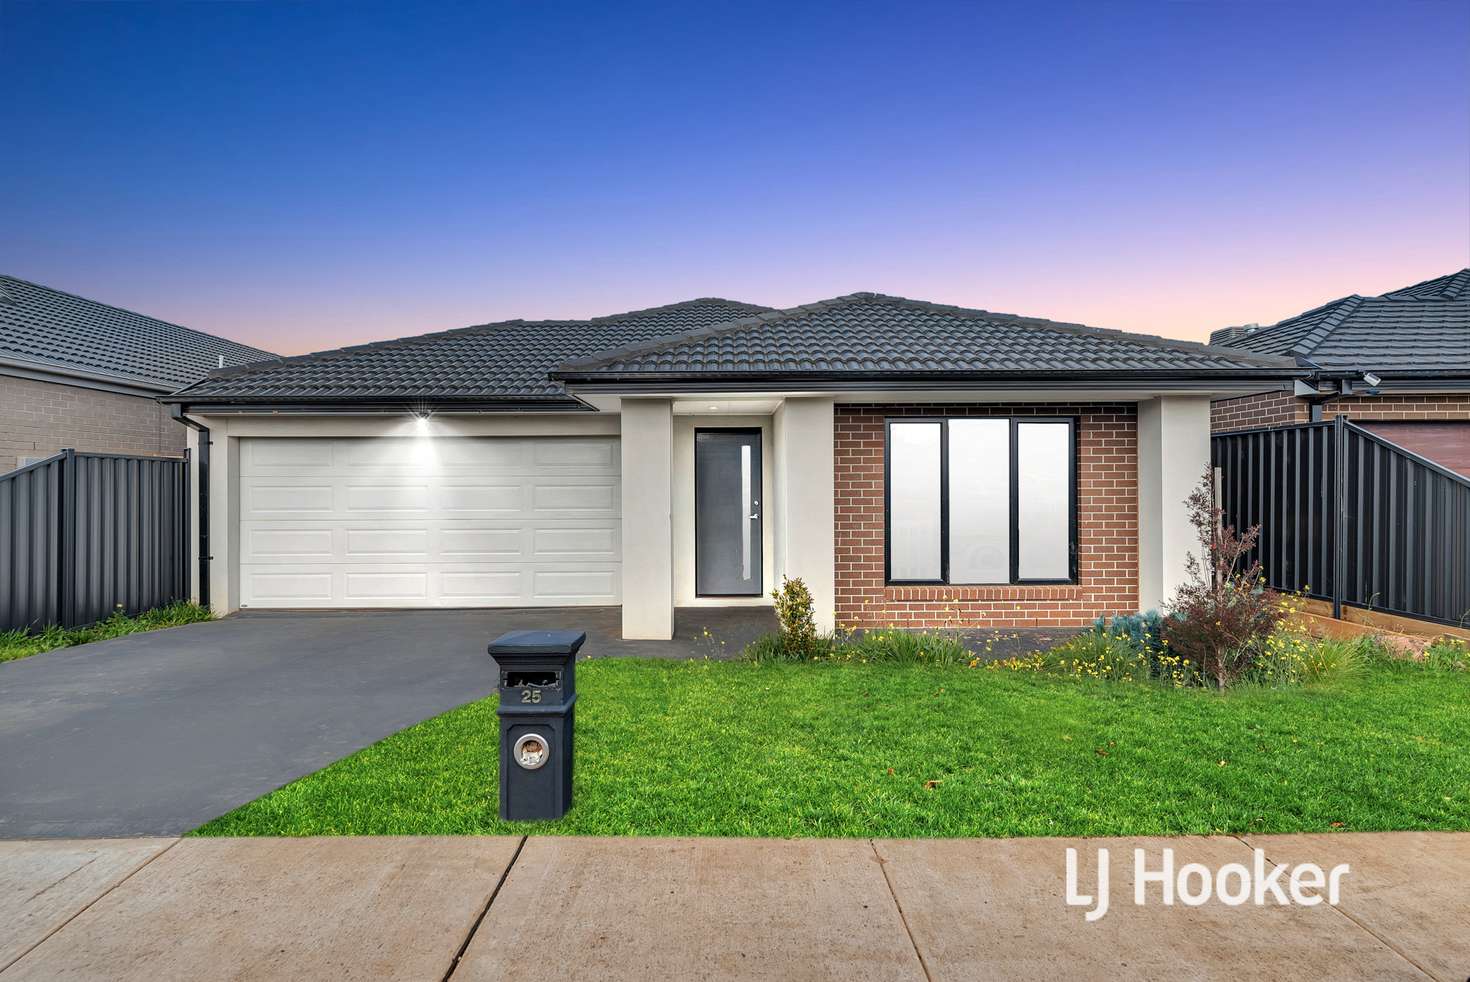 Main view of Homely house listing, 25 Lina Way, Melton South VIC 3338